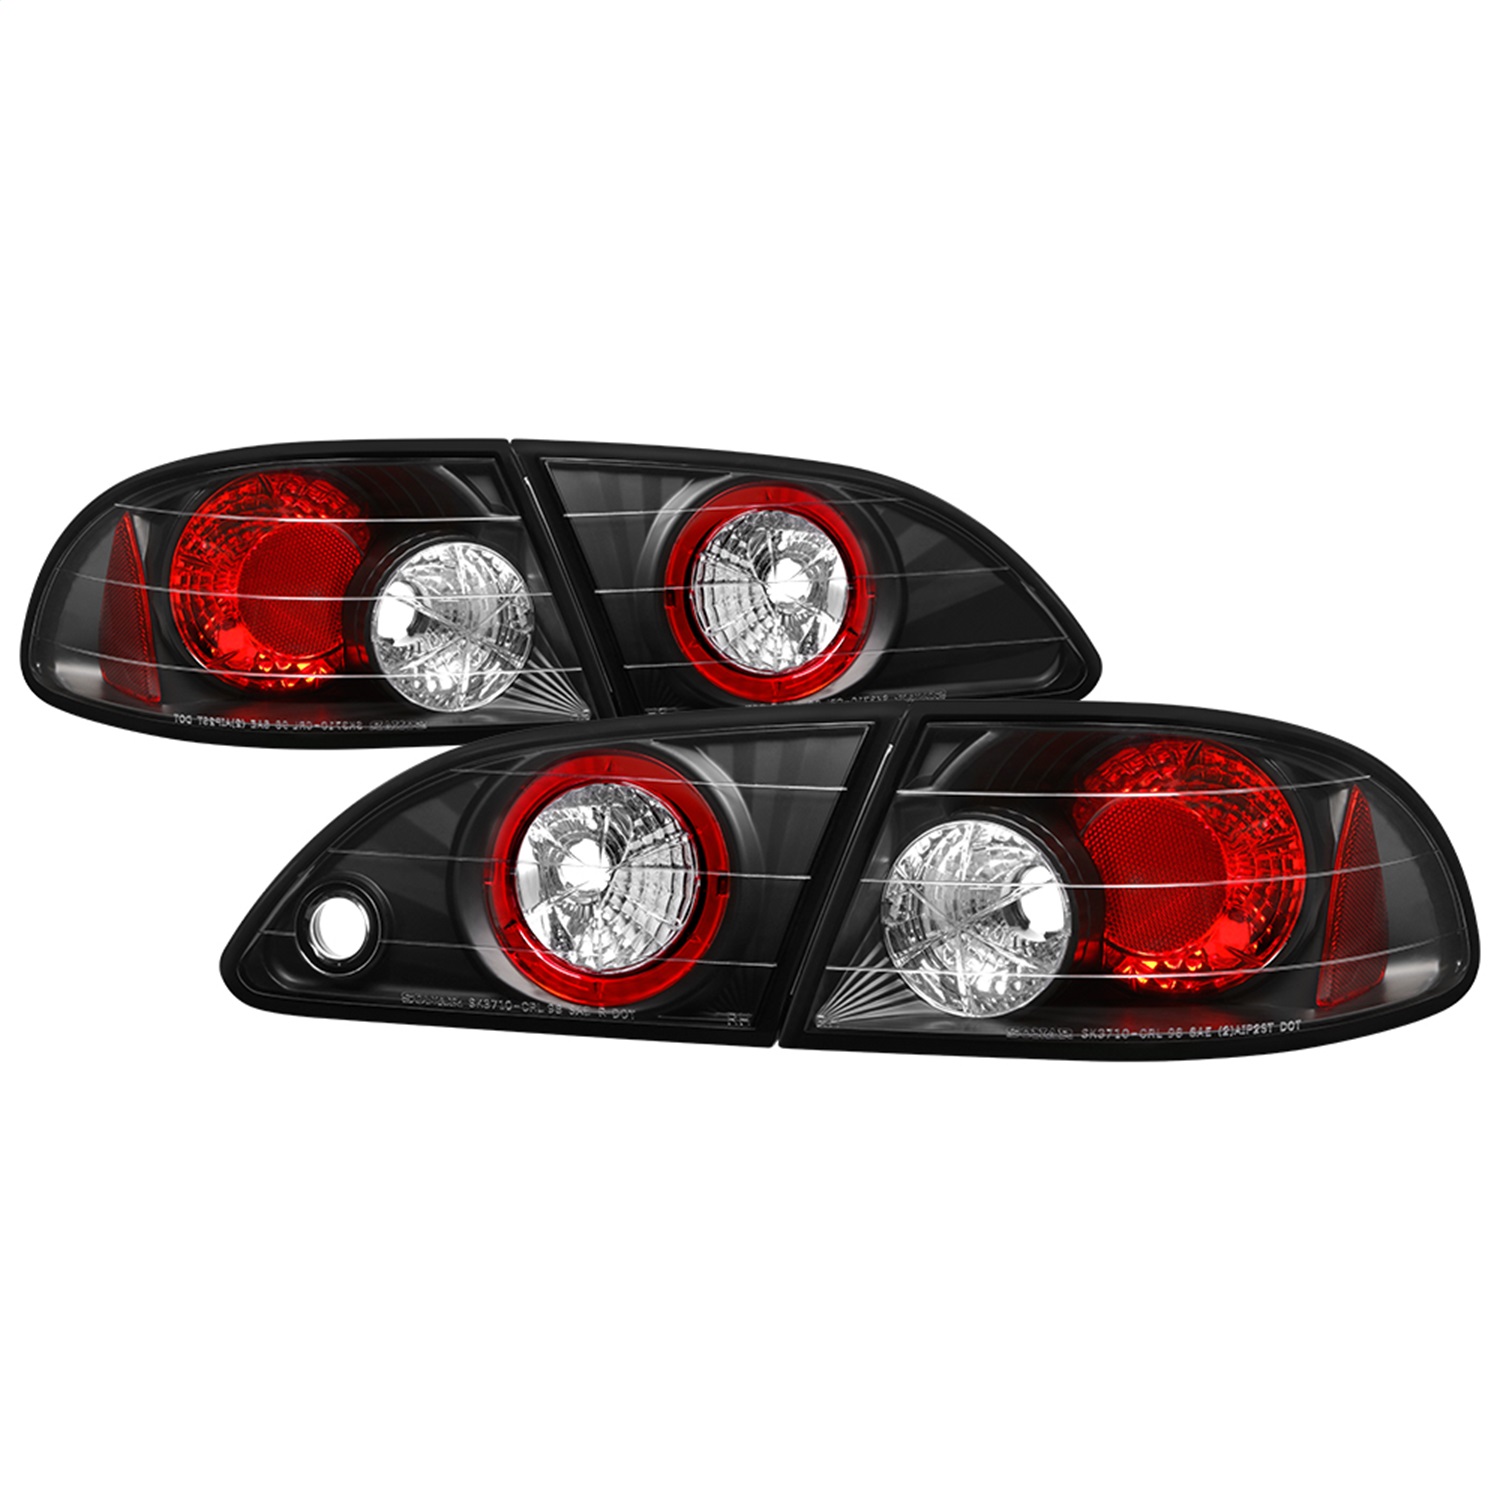 2003-2005 Chevy Cavalier Rear Brake Outter Tail Lights Lamps Left+Right